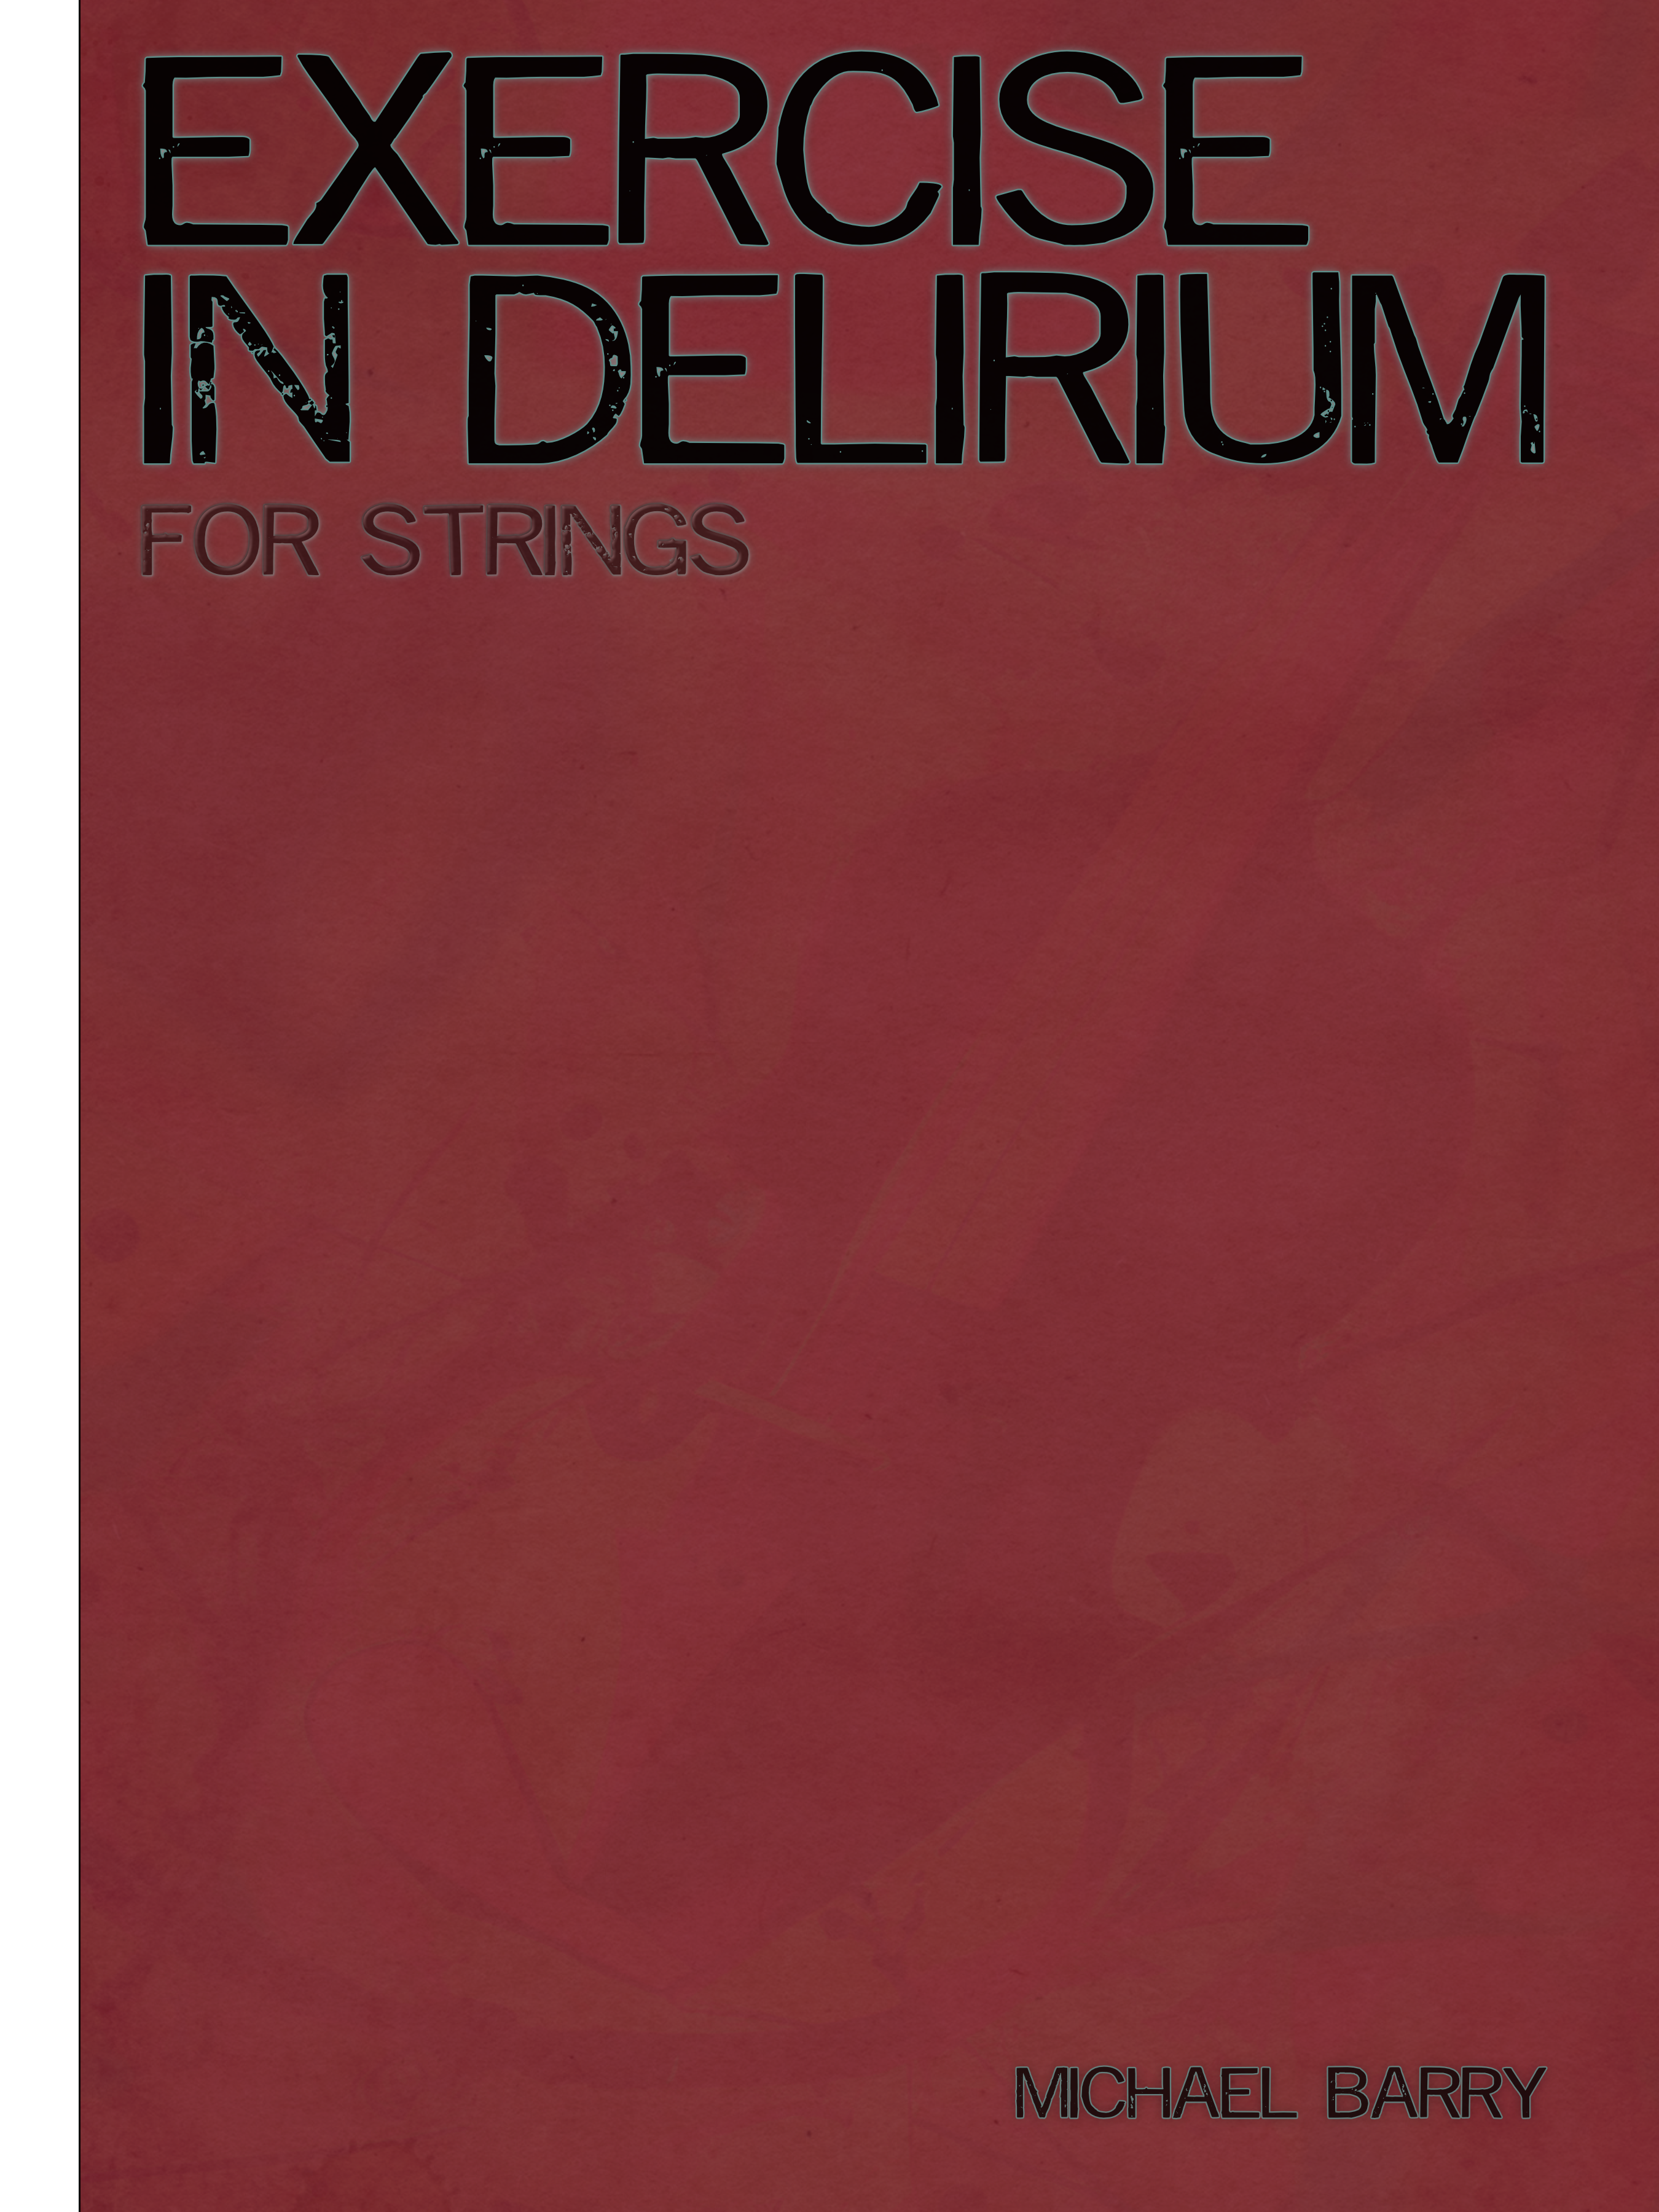 Exercise In Delirium (Score Only) by Michael Barry